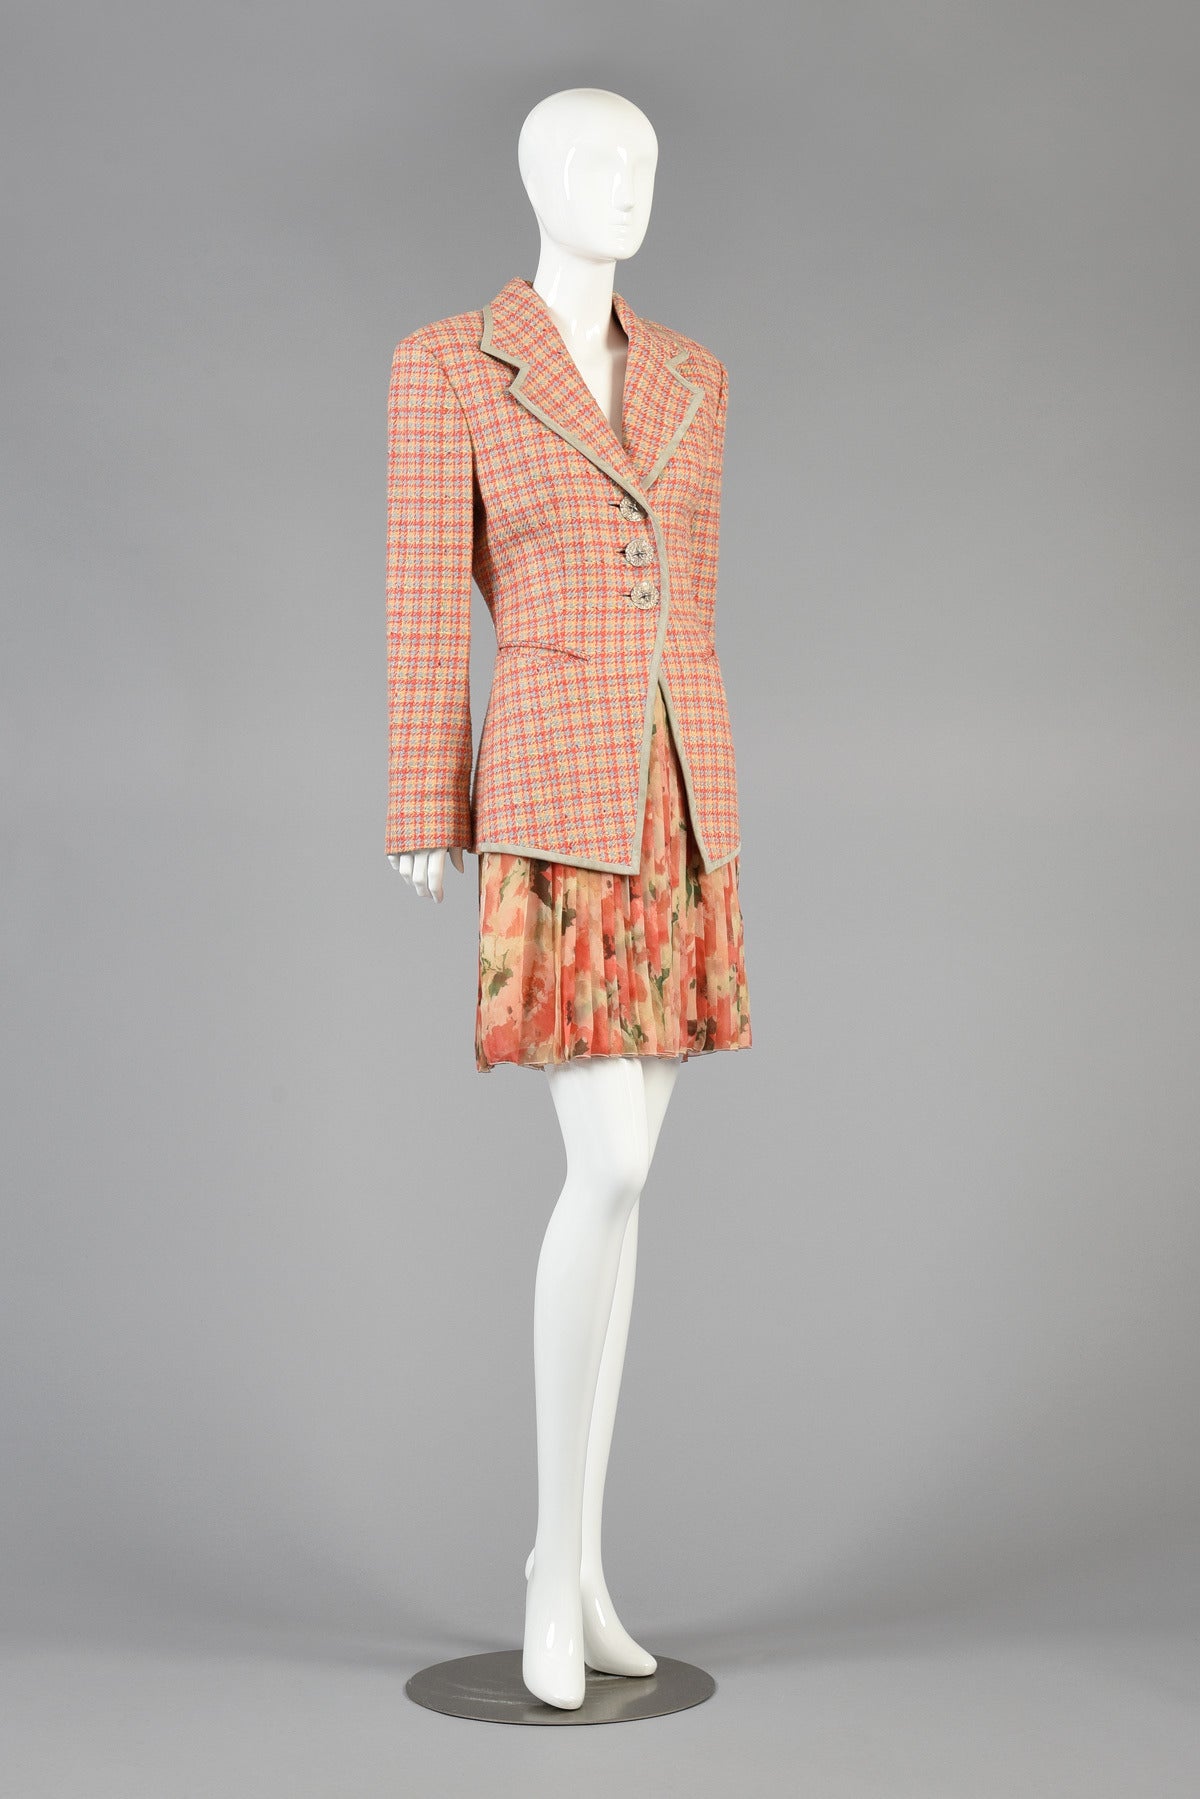 Women's 1990's Christian Dior Houndstooth Plaid Jacket For Sale